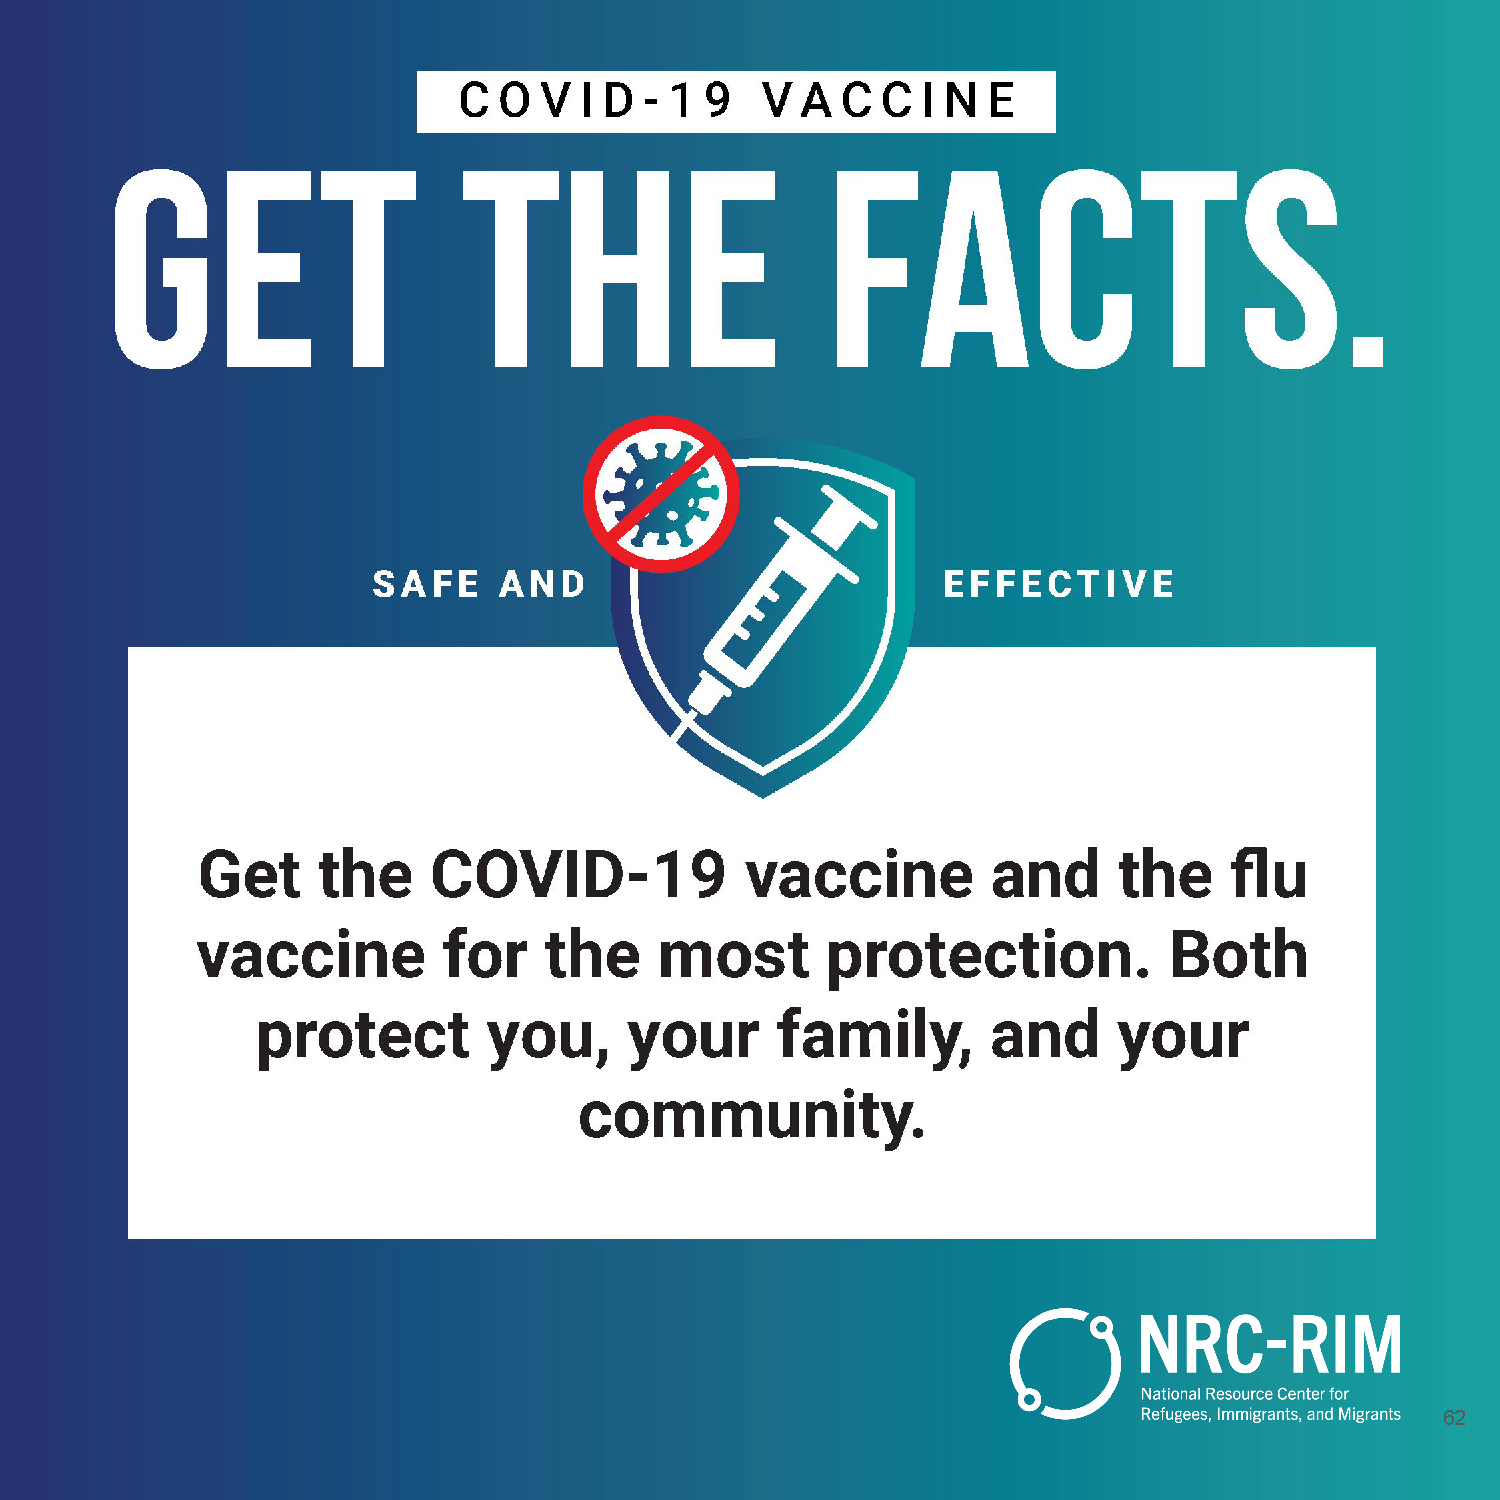 Get the COVID-19 vaccine and the flu vaccine for the most protection. Both protect you, your family, and your community.